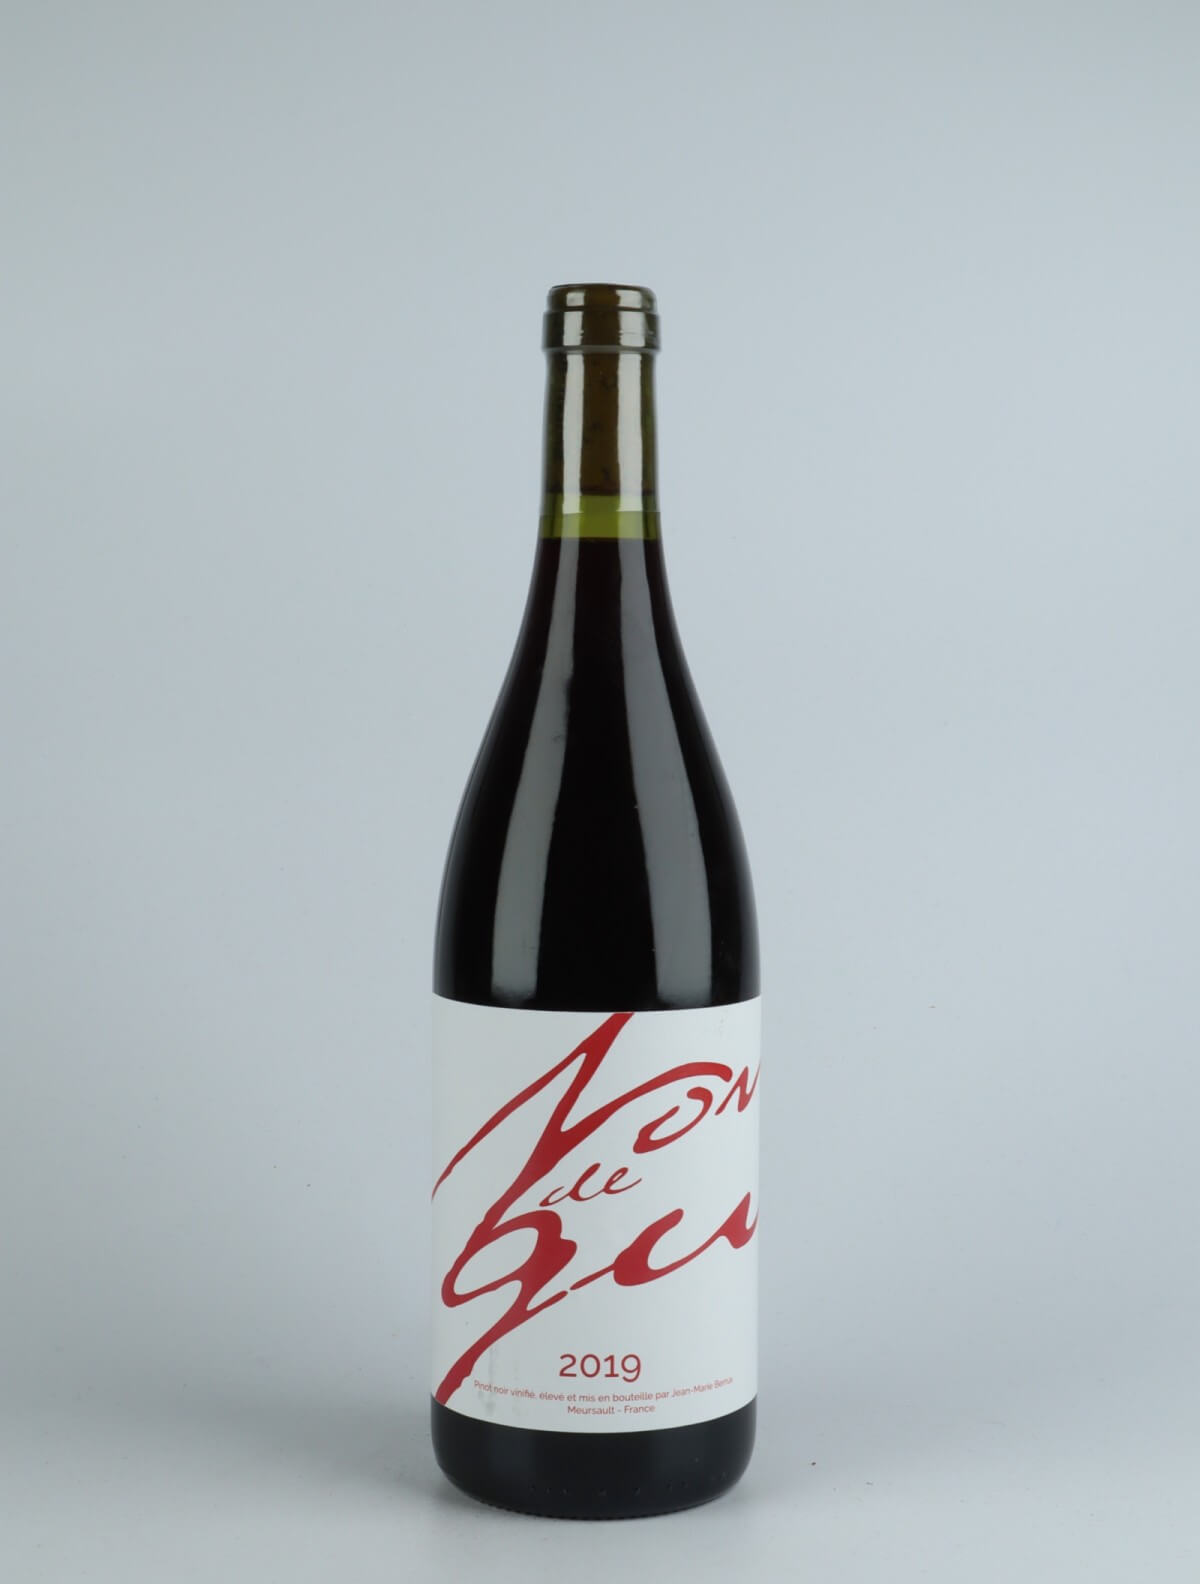 A bottle 2019 Nondegu Red wine from Jean-Marie Berrux, Burgundy in France